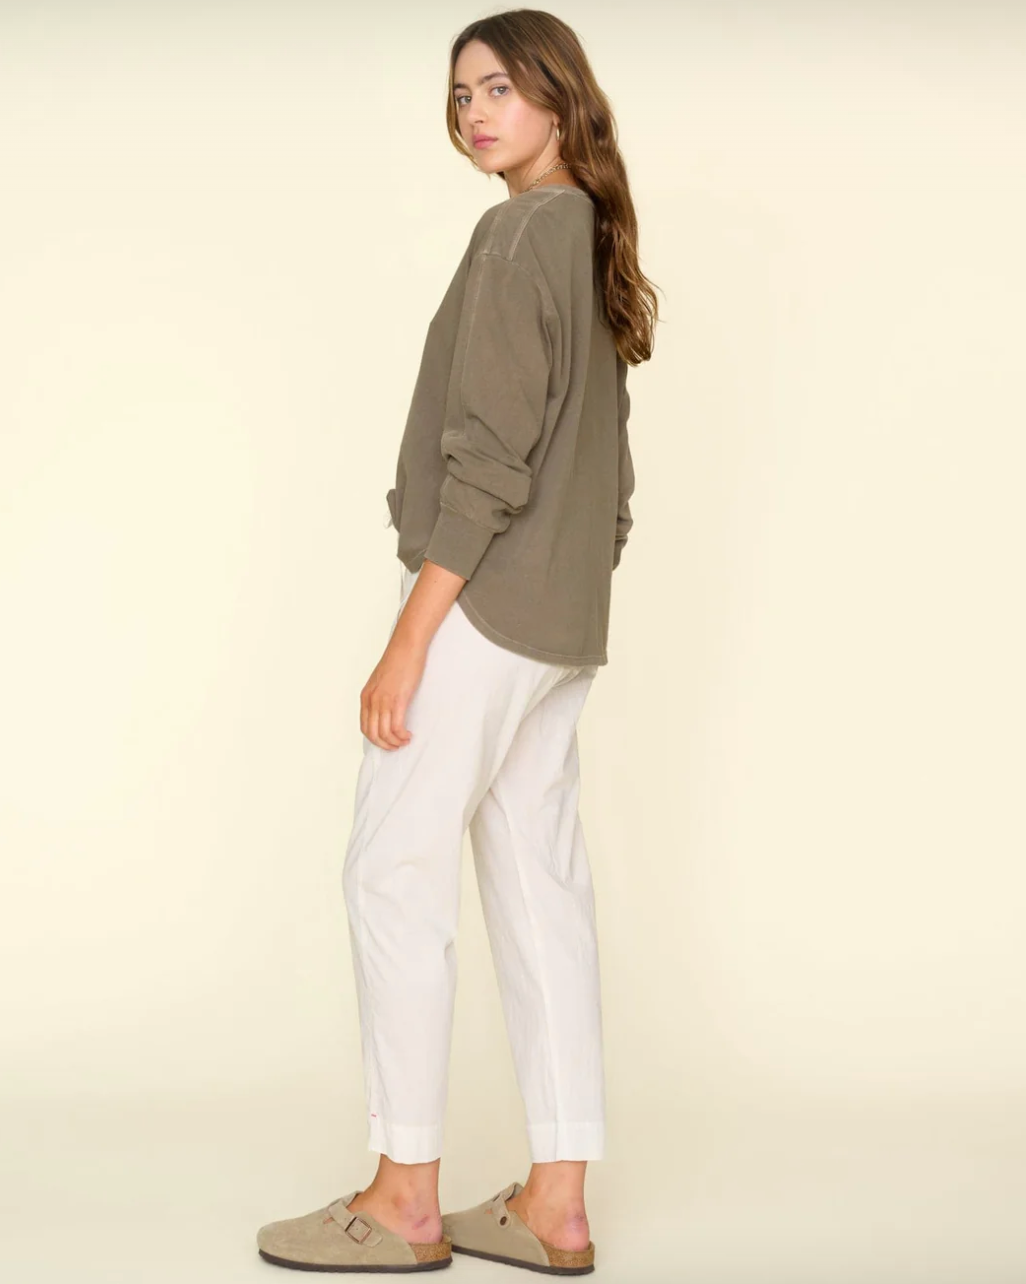 A person with long, wavy hair is standing sideways, facing left. They are wearing an oversized, olive-green sweater, Sand Draper Pant from Xirena, and beige slip-on sandals. The background is a solid light beige reminiscent of a cozy bungalow in Scottsdale Arizona. The person has a relaxed and casual demeanor.